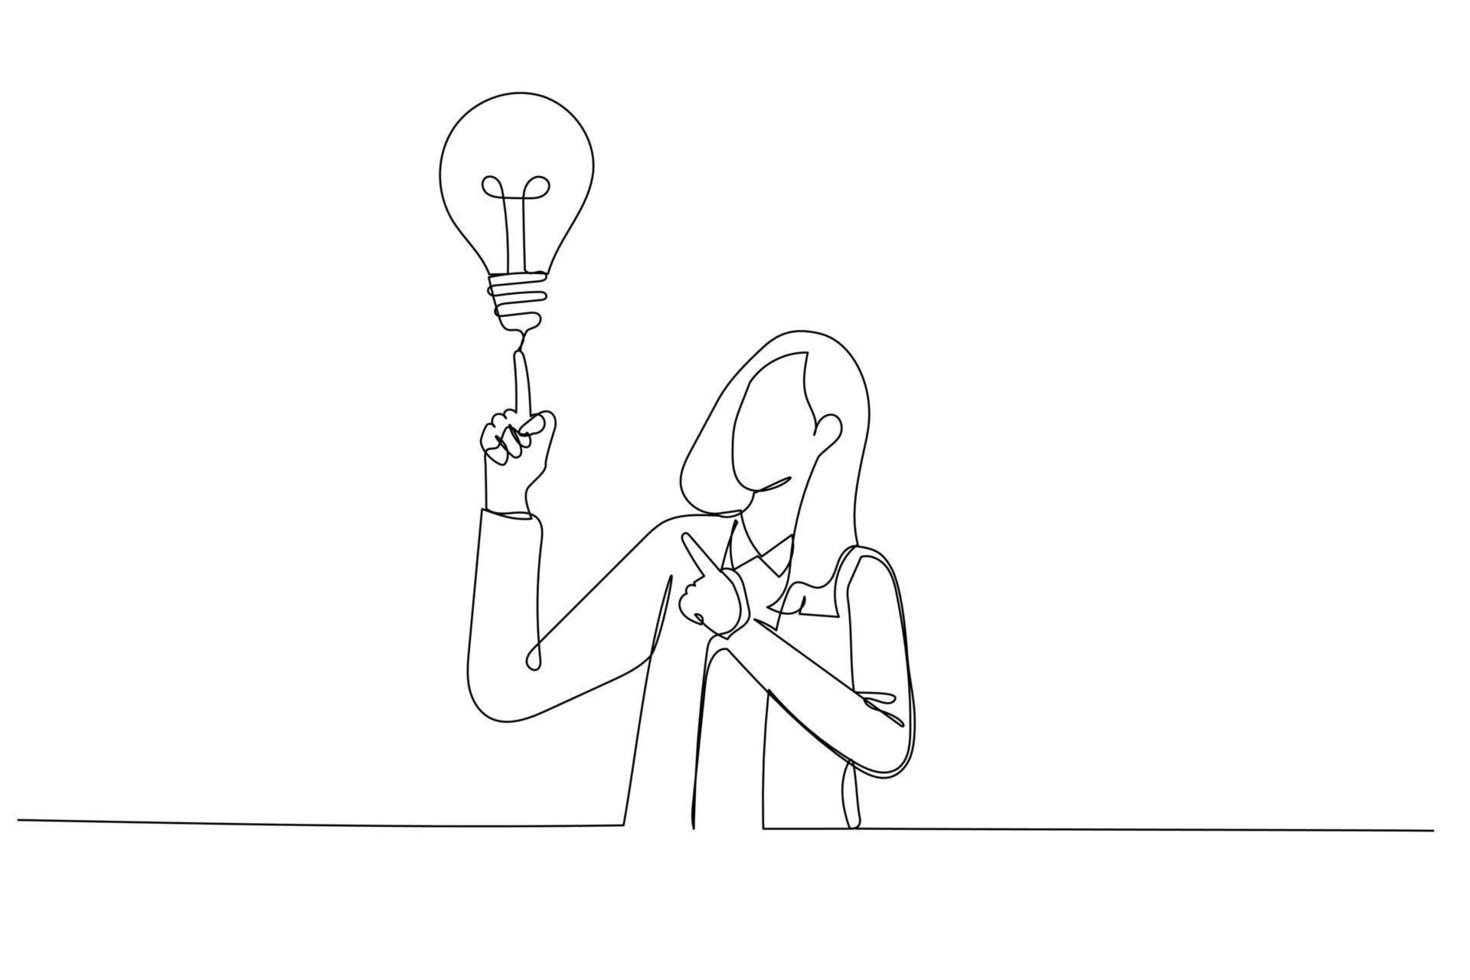 Cartoon of young businesswoman pointing with the index finger a great idea. Single continuous line art style vector